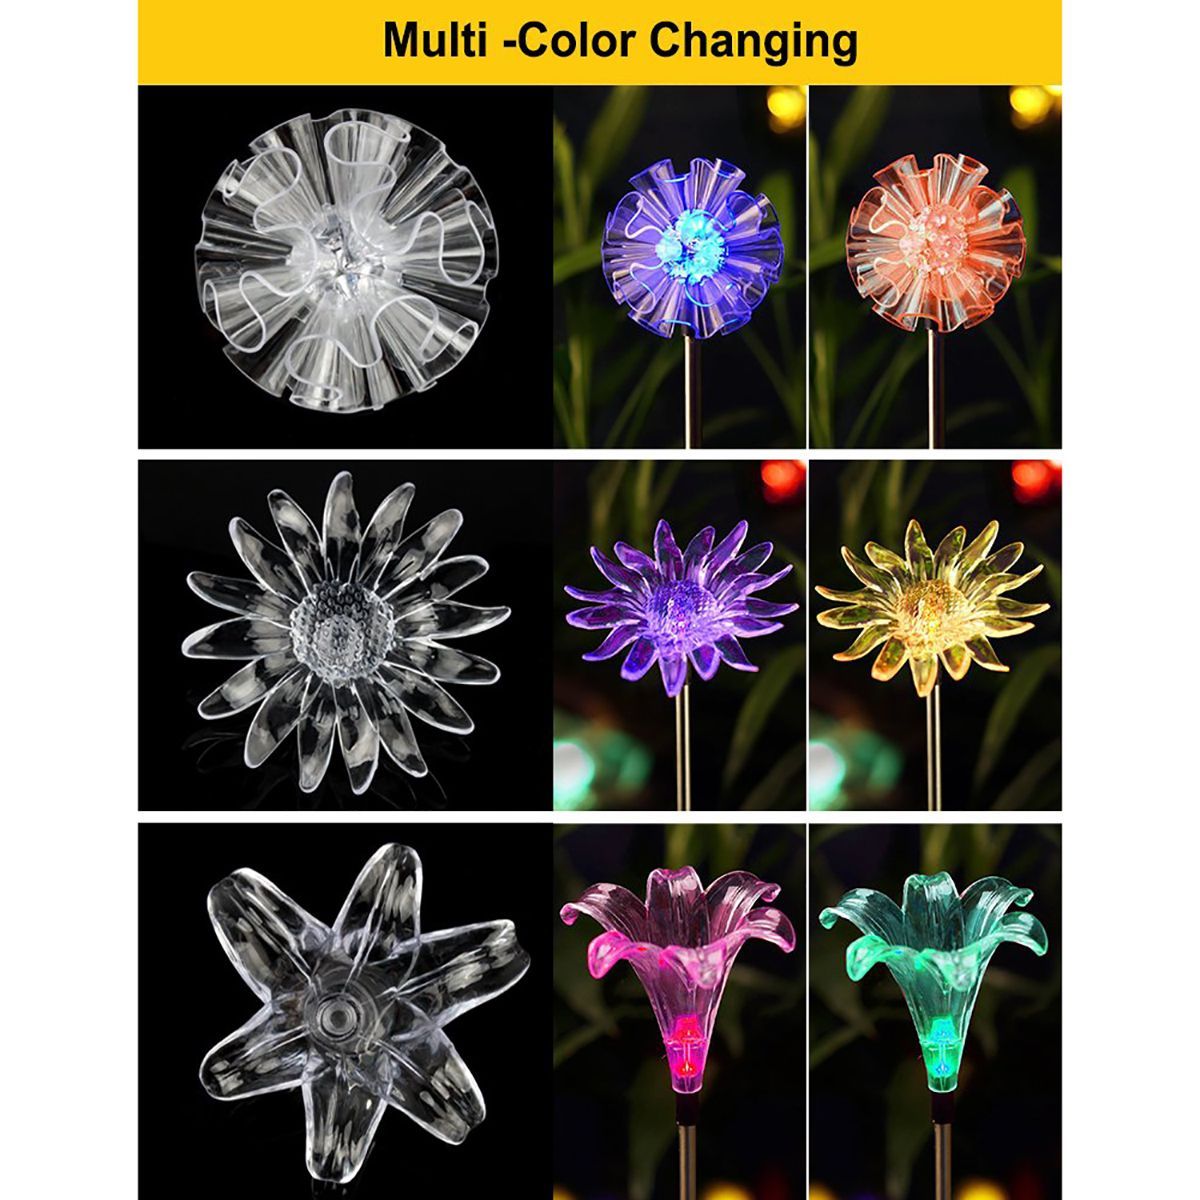 LED-Solar-Power-Lily-Flower-Stake-Lights-Outdoor-Garden-Path-Landscape-Lamps-1762961